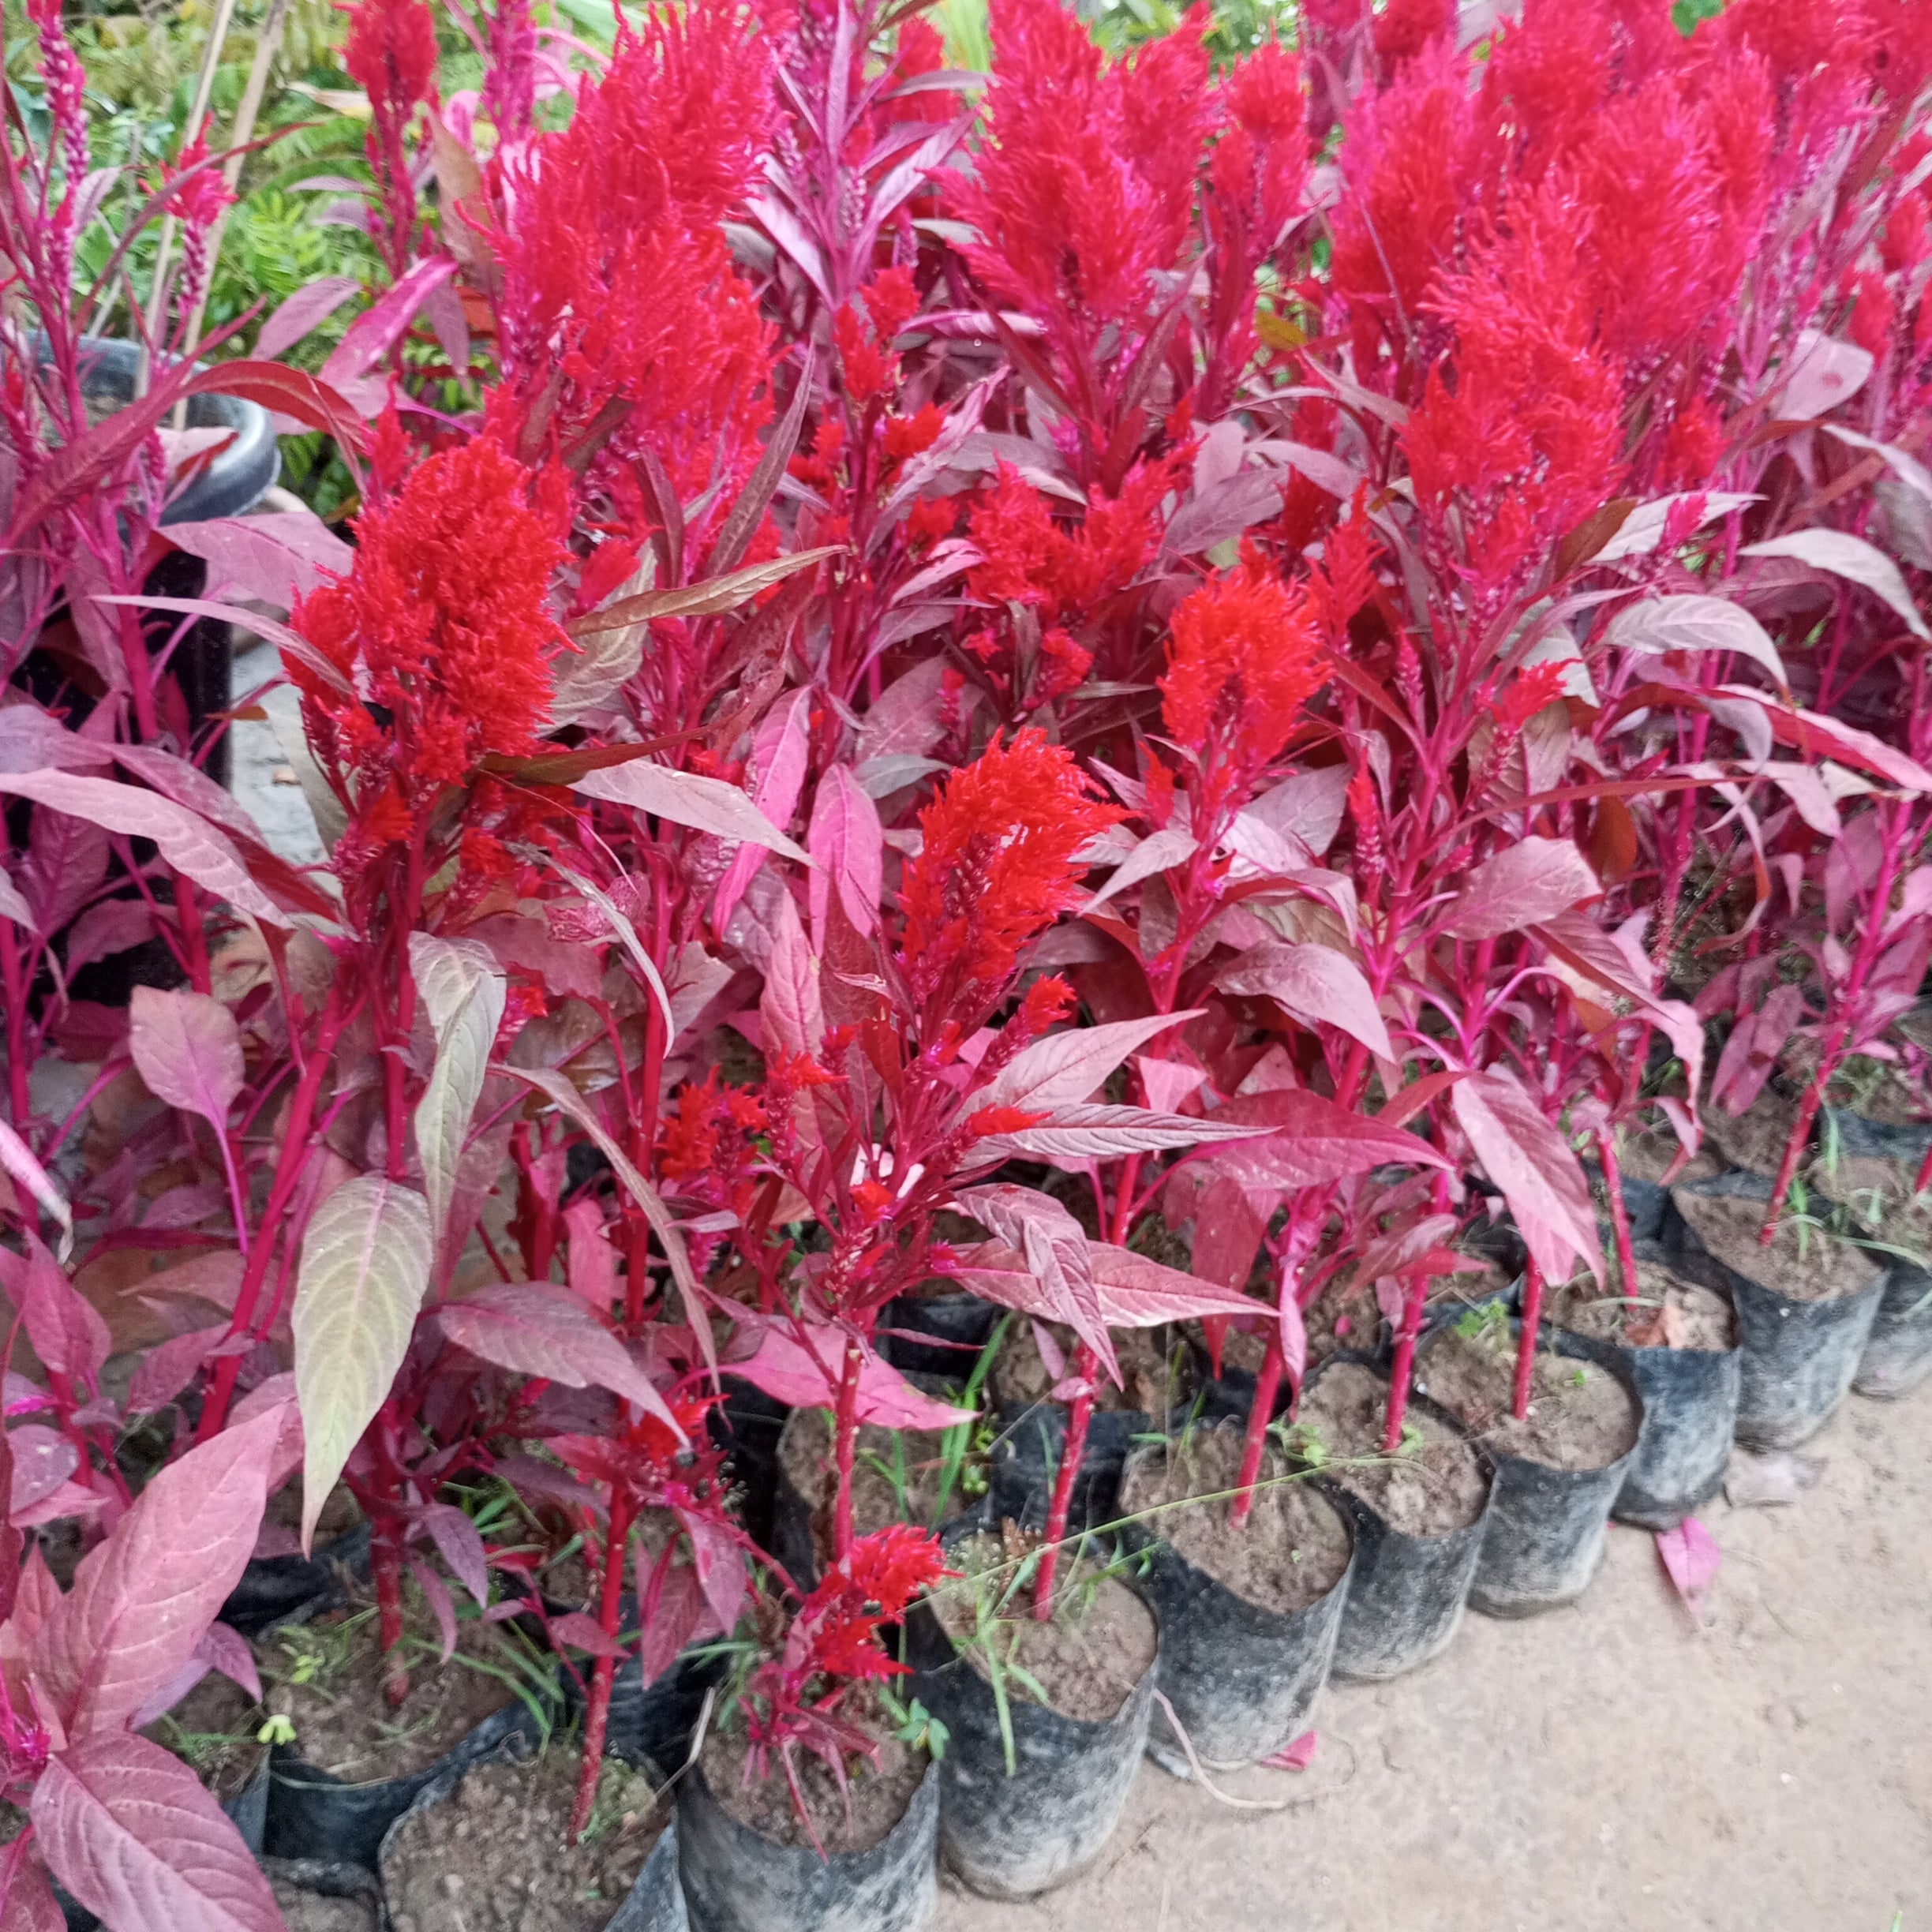 Celosia Red Plant Online: Transform your garden, Buy vibrant Celosia online for enduring color